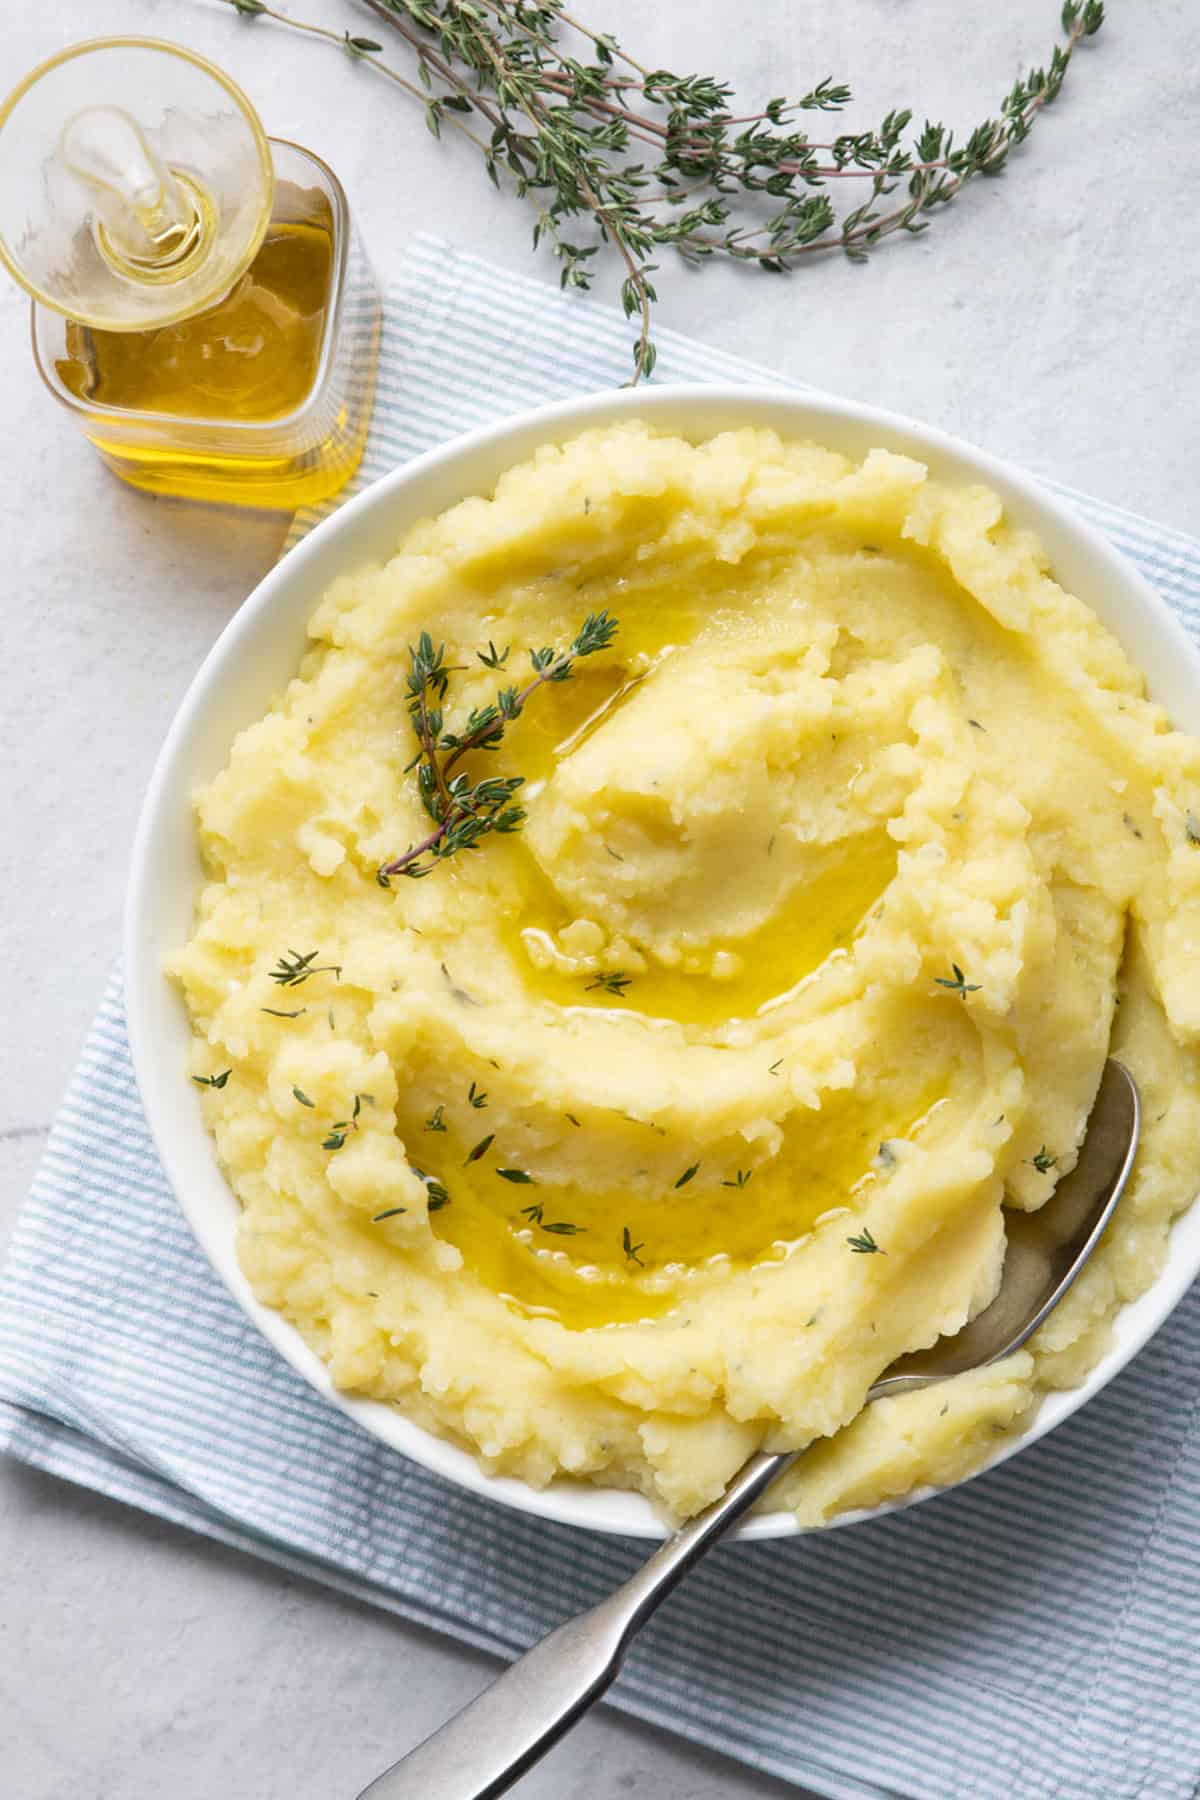 Mashed potatoes with olive oil in a large bowl with a spoon